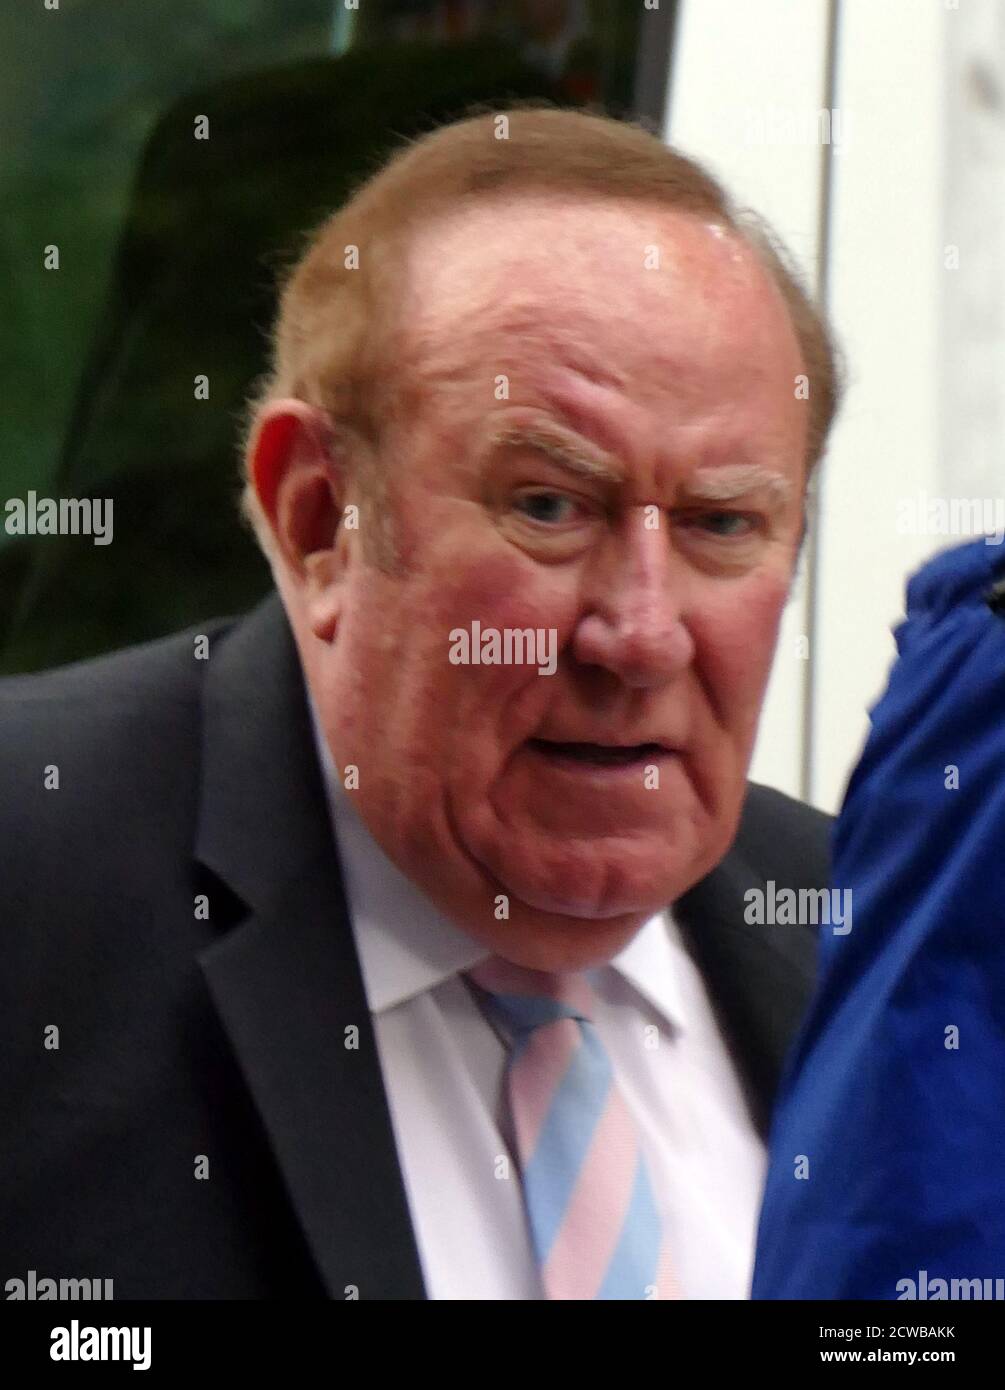 Andrew Neil (born 1949), British journalist and broadcaster. As of 2019, he presents the live political programmes Politics Live and The Andrew Neil Show on BBC Two. Neil was appointed editor of The Sunday Times by Rupert Murdoch, and served in this position from 1983 to 1994. After this he became a contributor to the Daily Mail. He was formerly chief executive and editor-in-chief of the Press Holdings group.[2] In 1988 he became founding chairman of Sky TV Stock Photo